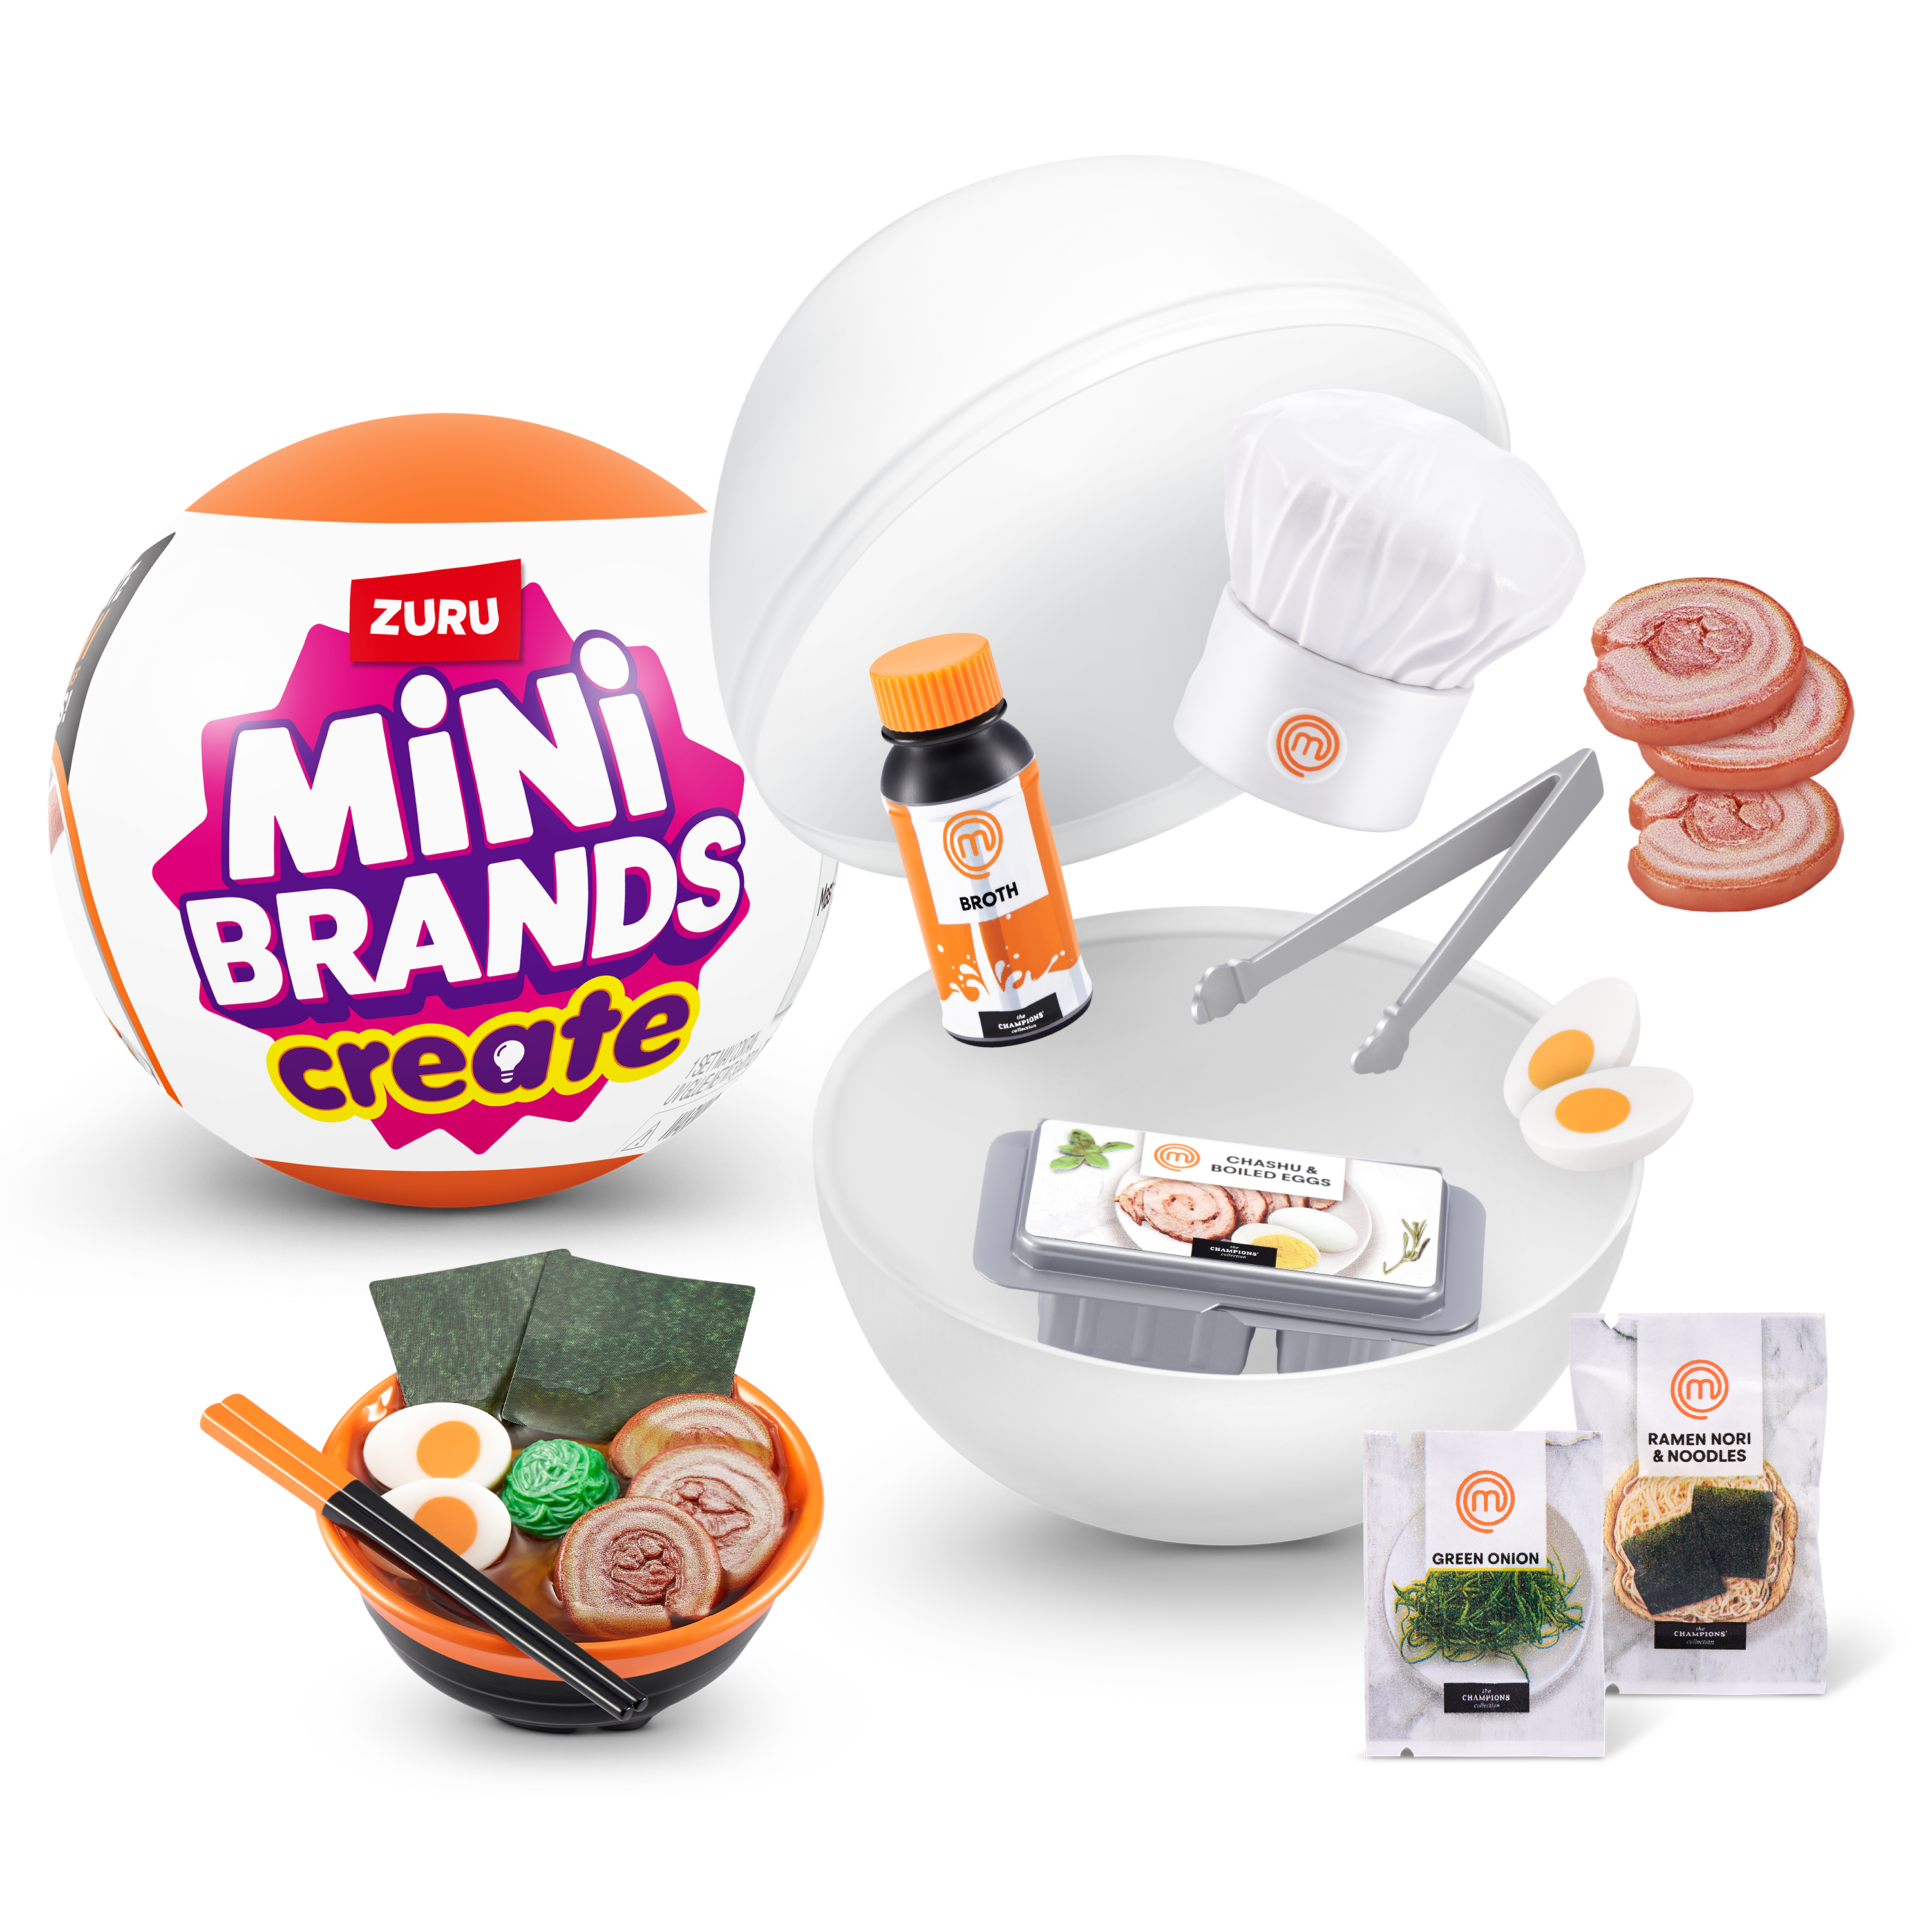 ZURU Mini Brands MasterChef series featuring miniature collectible items including a broth bottle, chef's hat, sliced ham on grill, sushi set, ramen bowl, and green onion pack, all displayed with the product's sphere-shaped packaging.